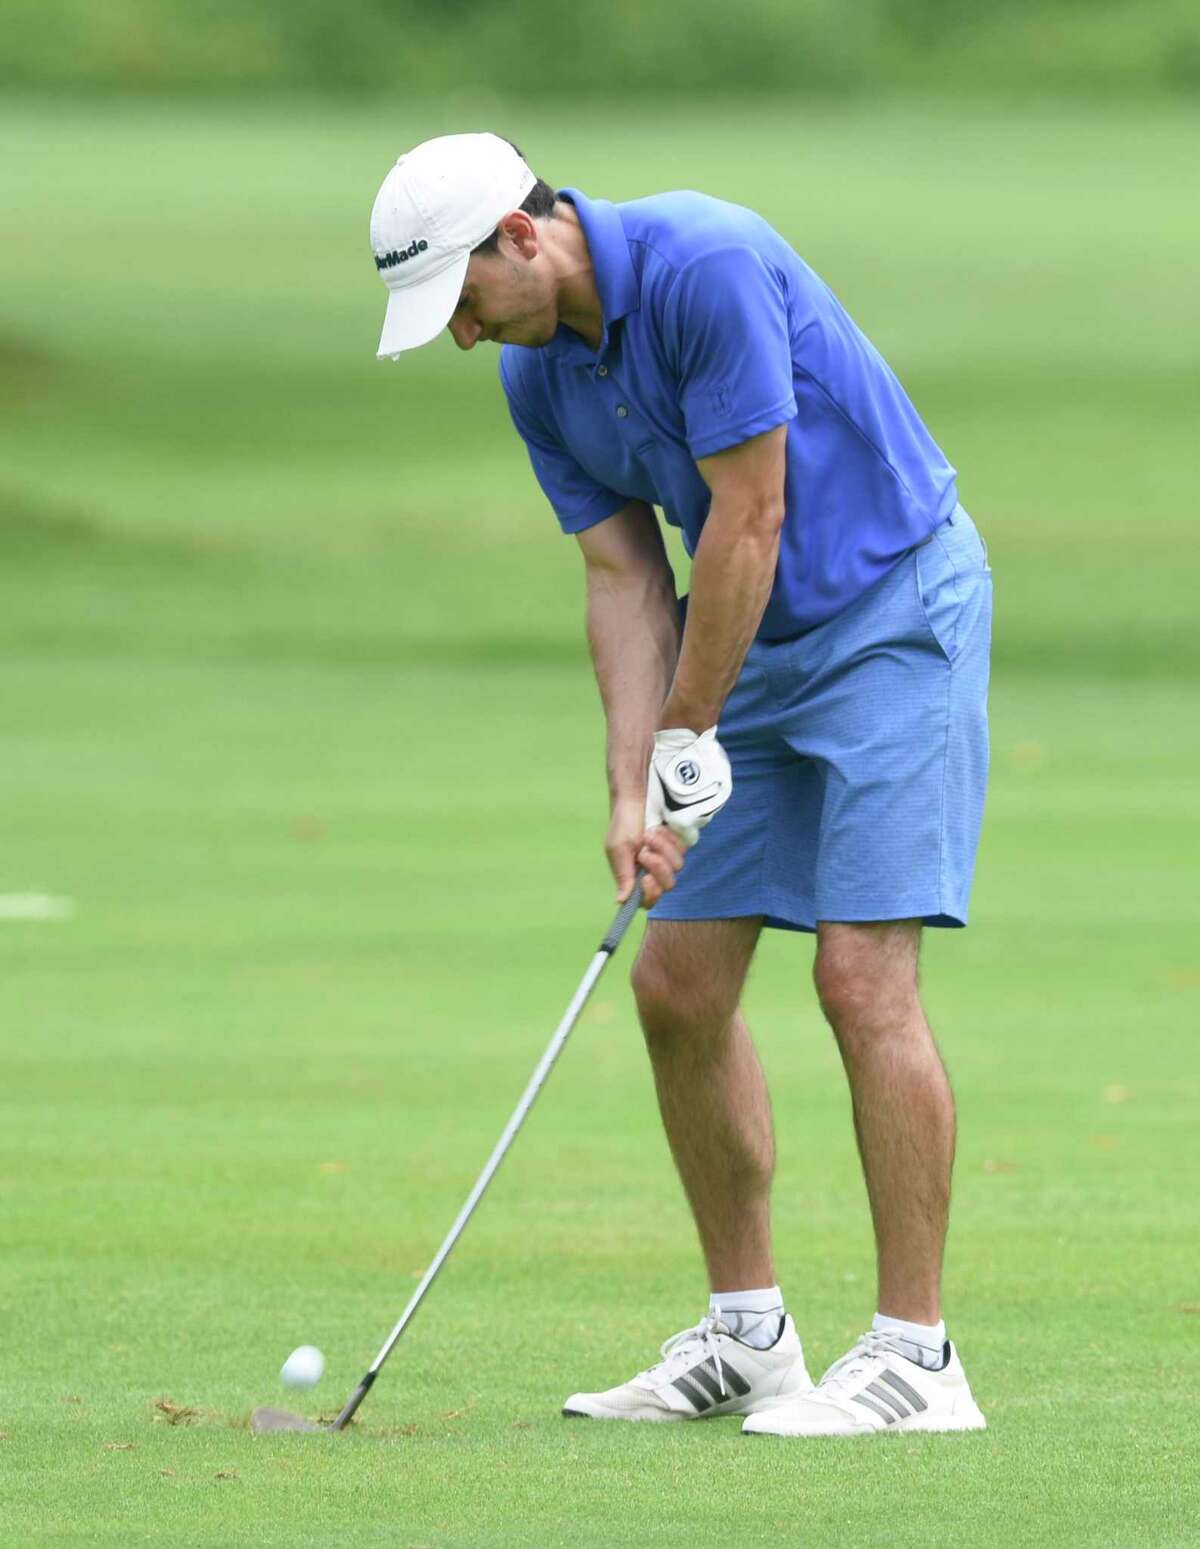 Photos from the 76th Annual Town Wide Men's Golf Tournament at Griffith E. Harris Golf Course in Greenwich, Conn. Sunday, June 27, 2021.